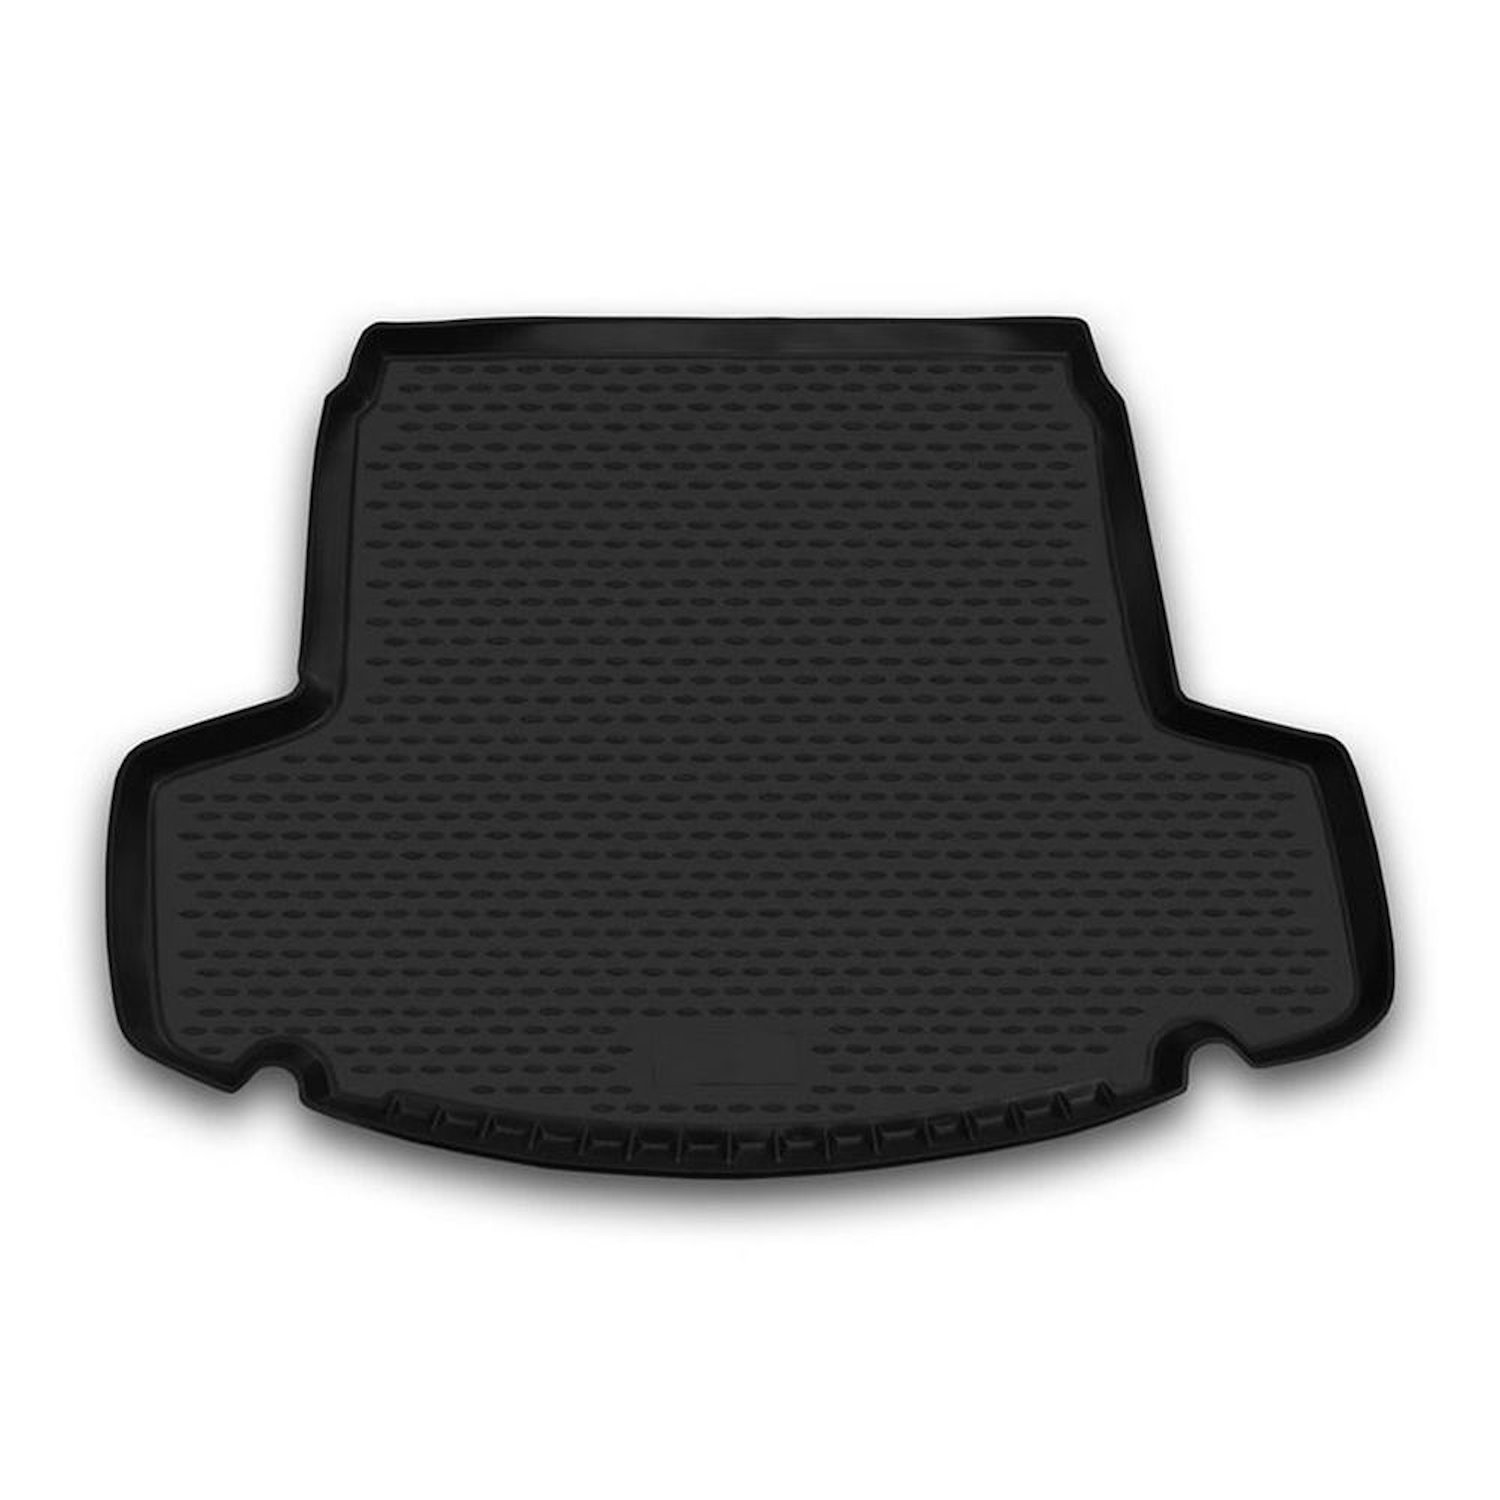 Profile Cargo Liner for 2012-2017 Chevy Captiva